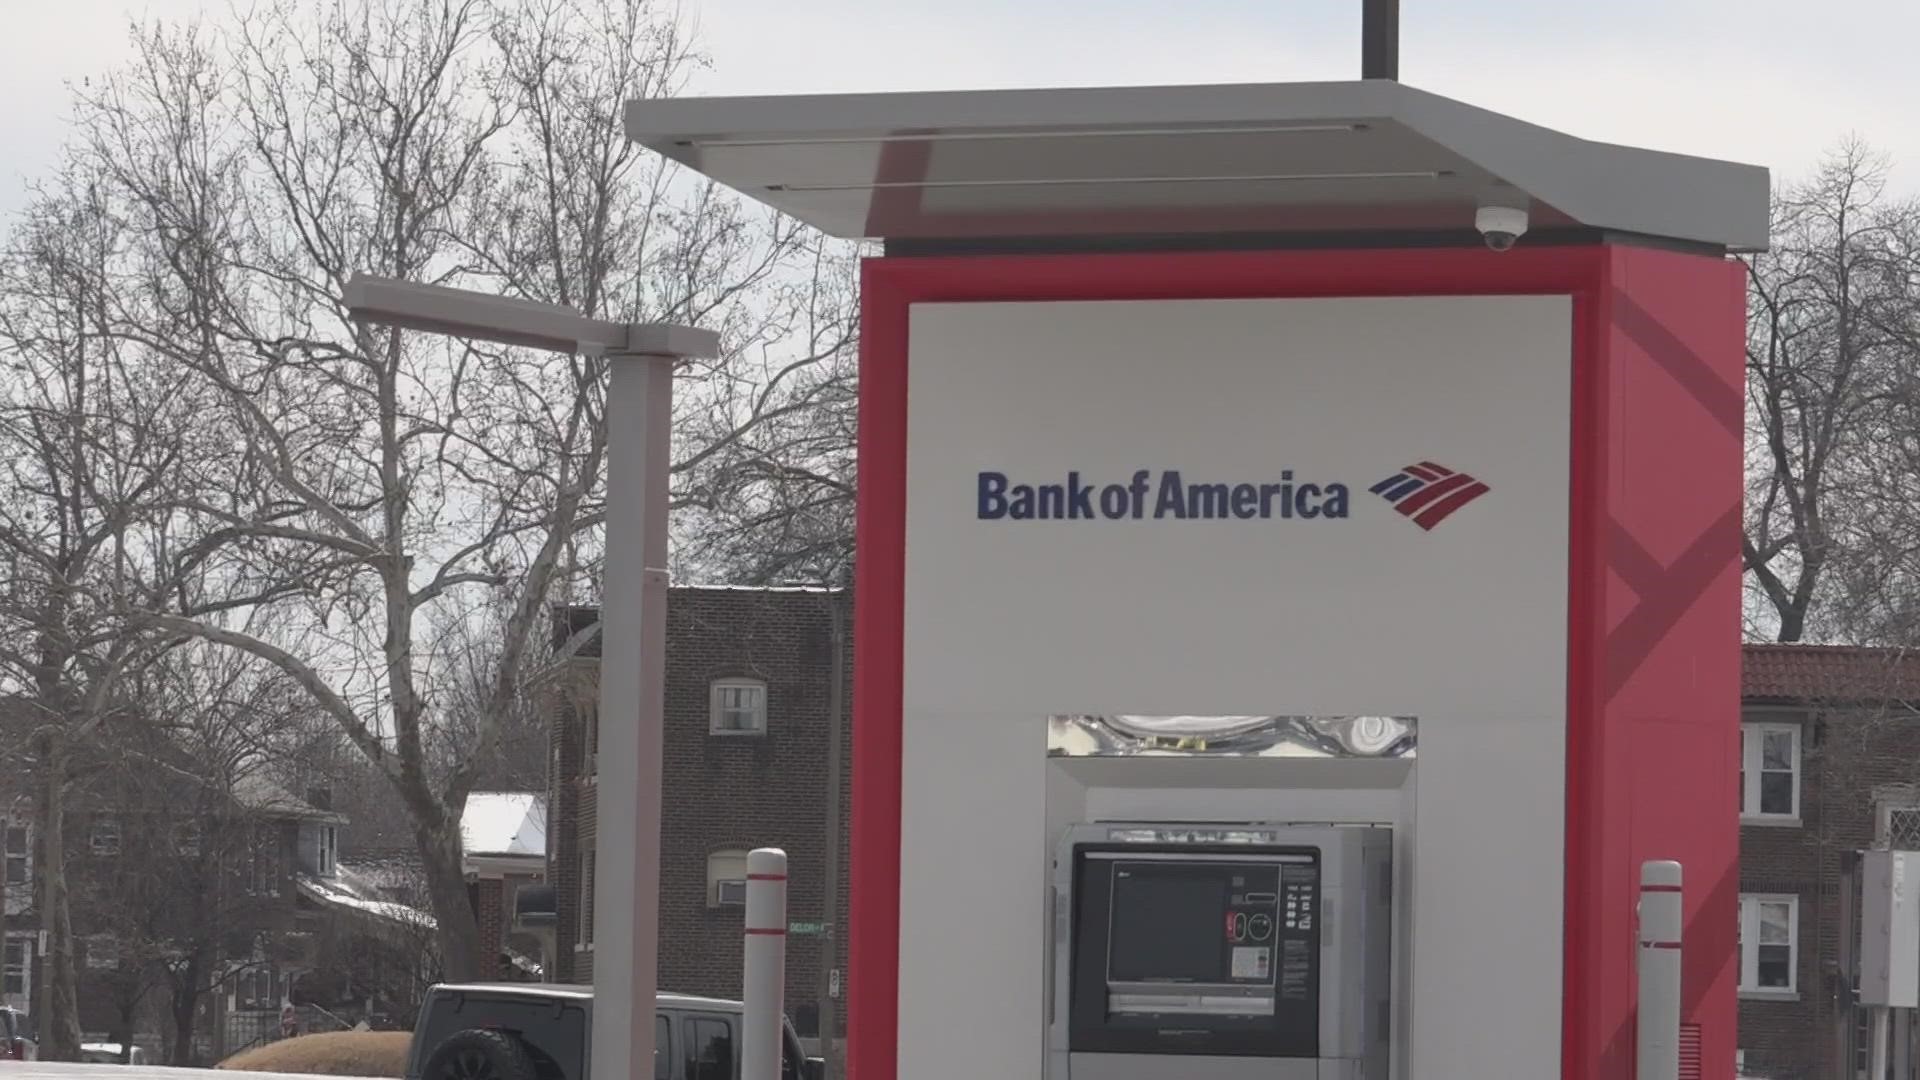 There have been three robberies at south St. Louis ATMs since January 23.